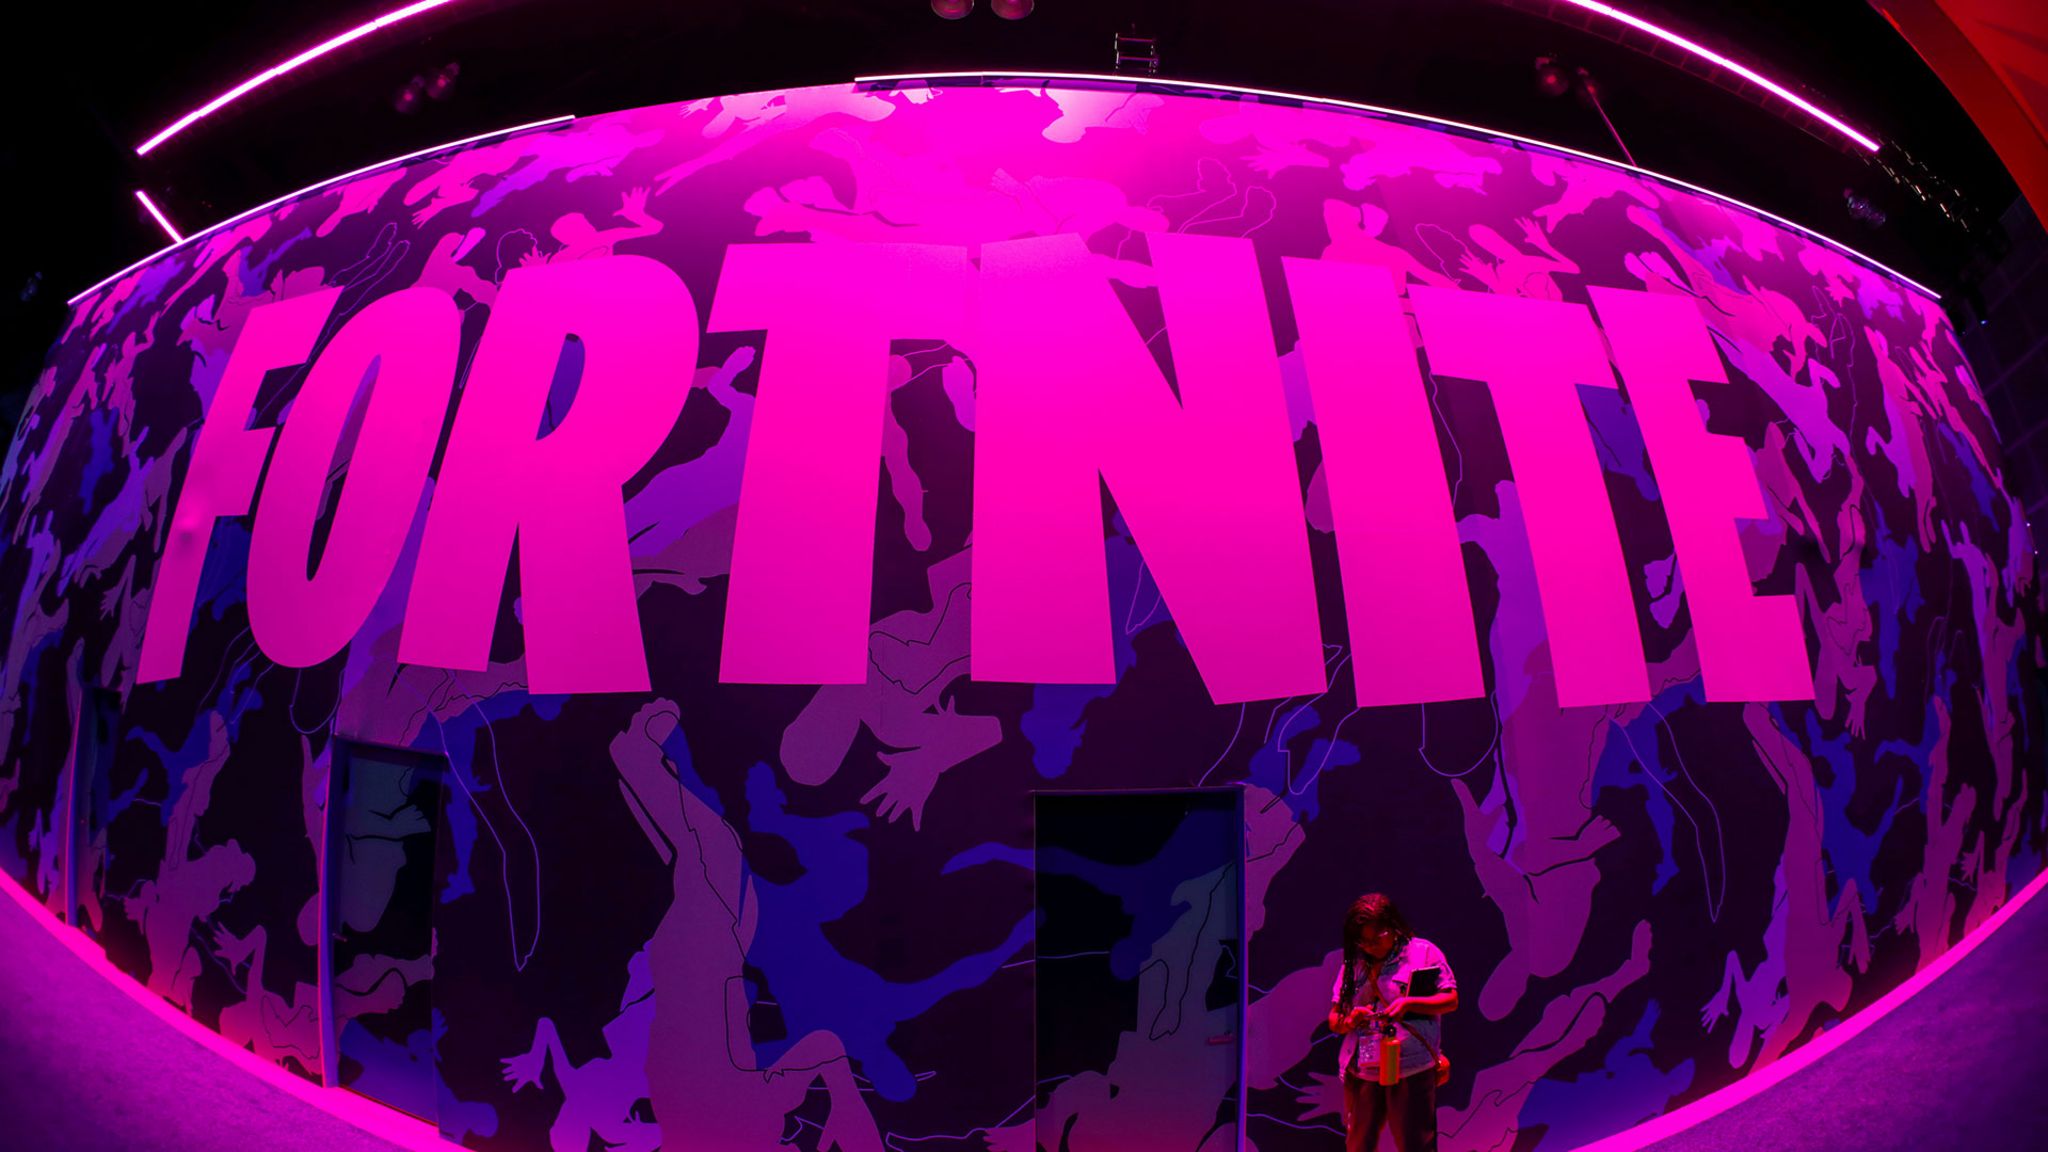 A giant Fortnite logo is seen here at an event, lit by purple lights with a bystander in front of it, appearing small by comparison to the sign's oversized scale